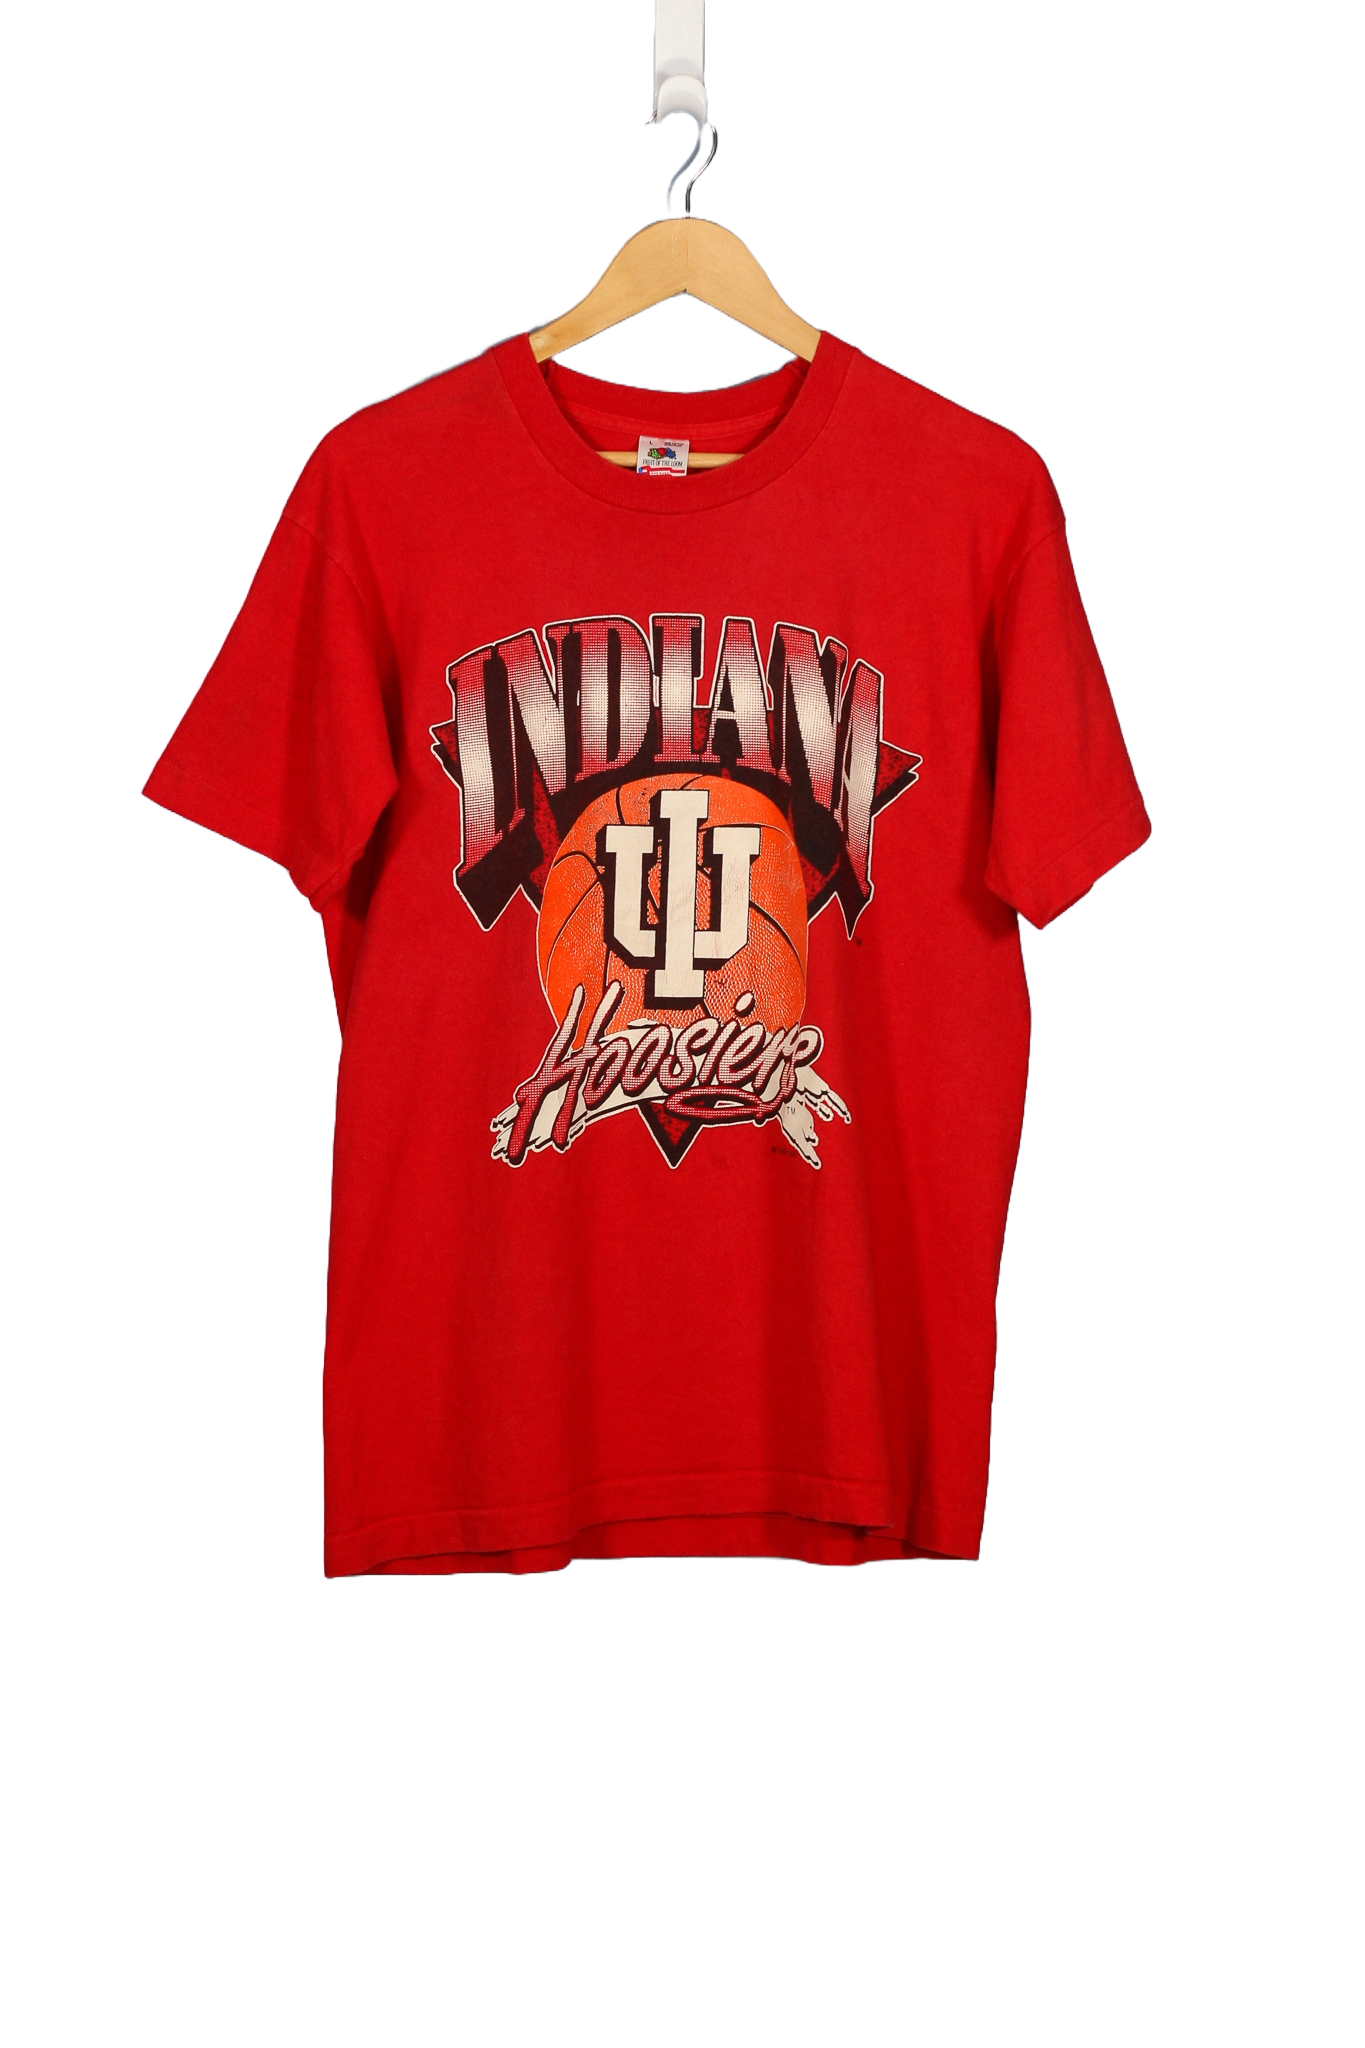 Vintage Indiana Hoosiers Basketball College T-Shirt - L